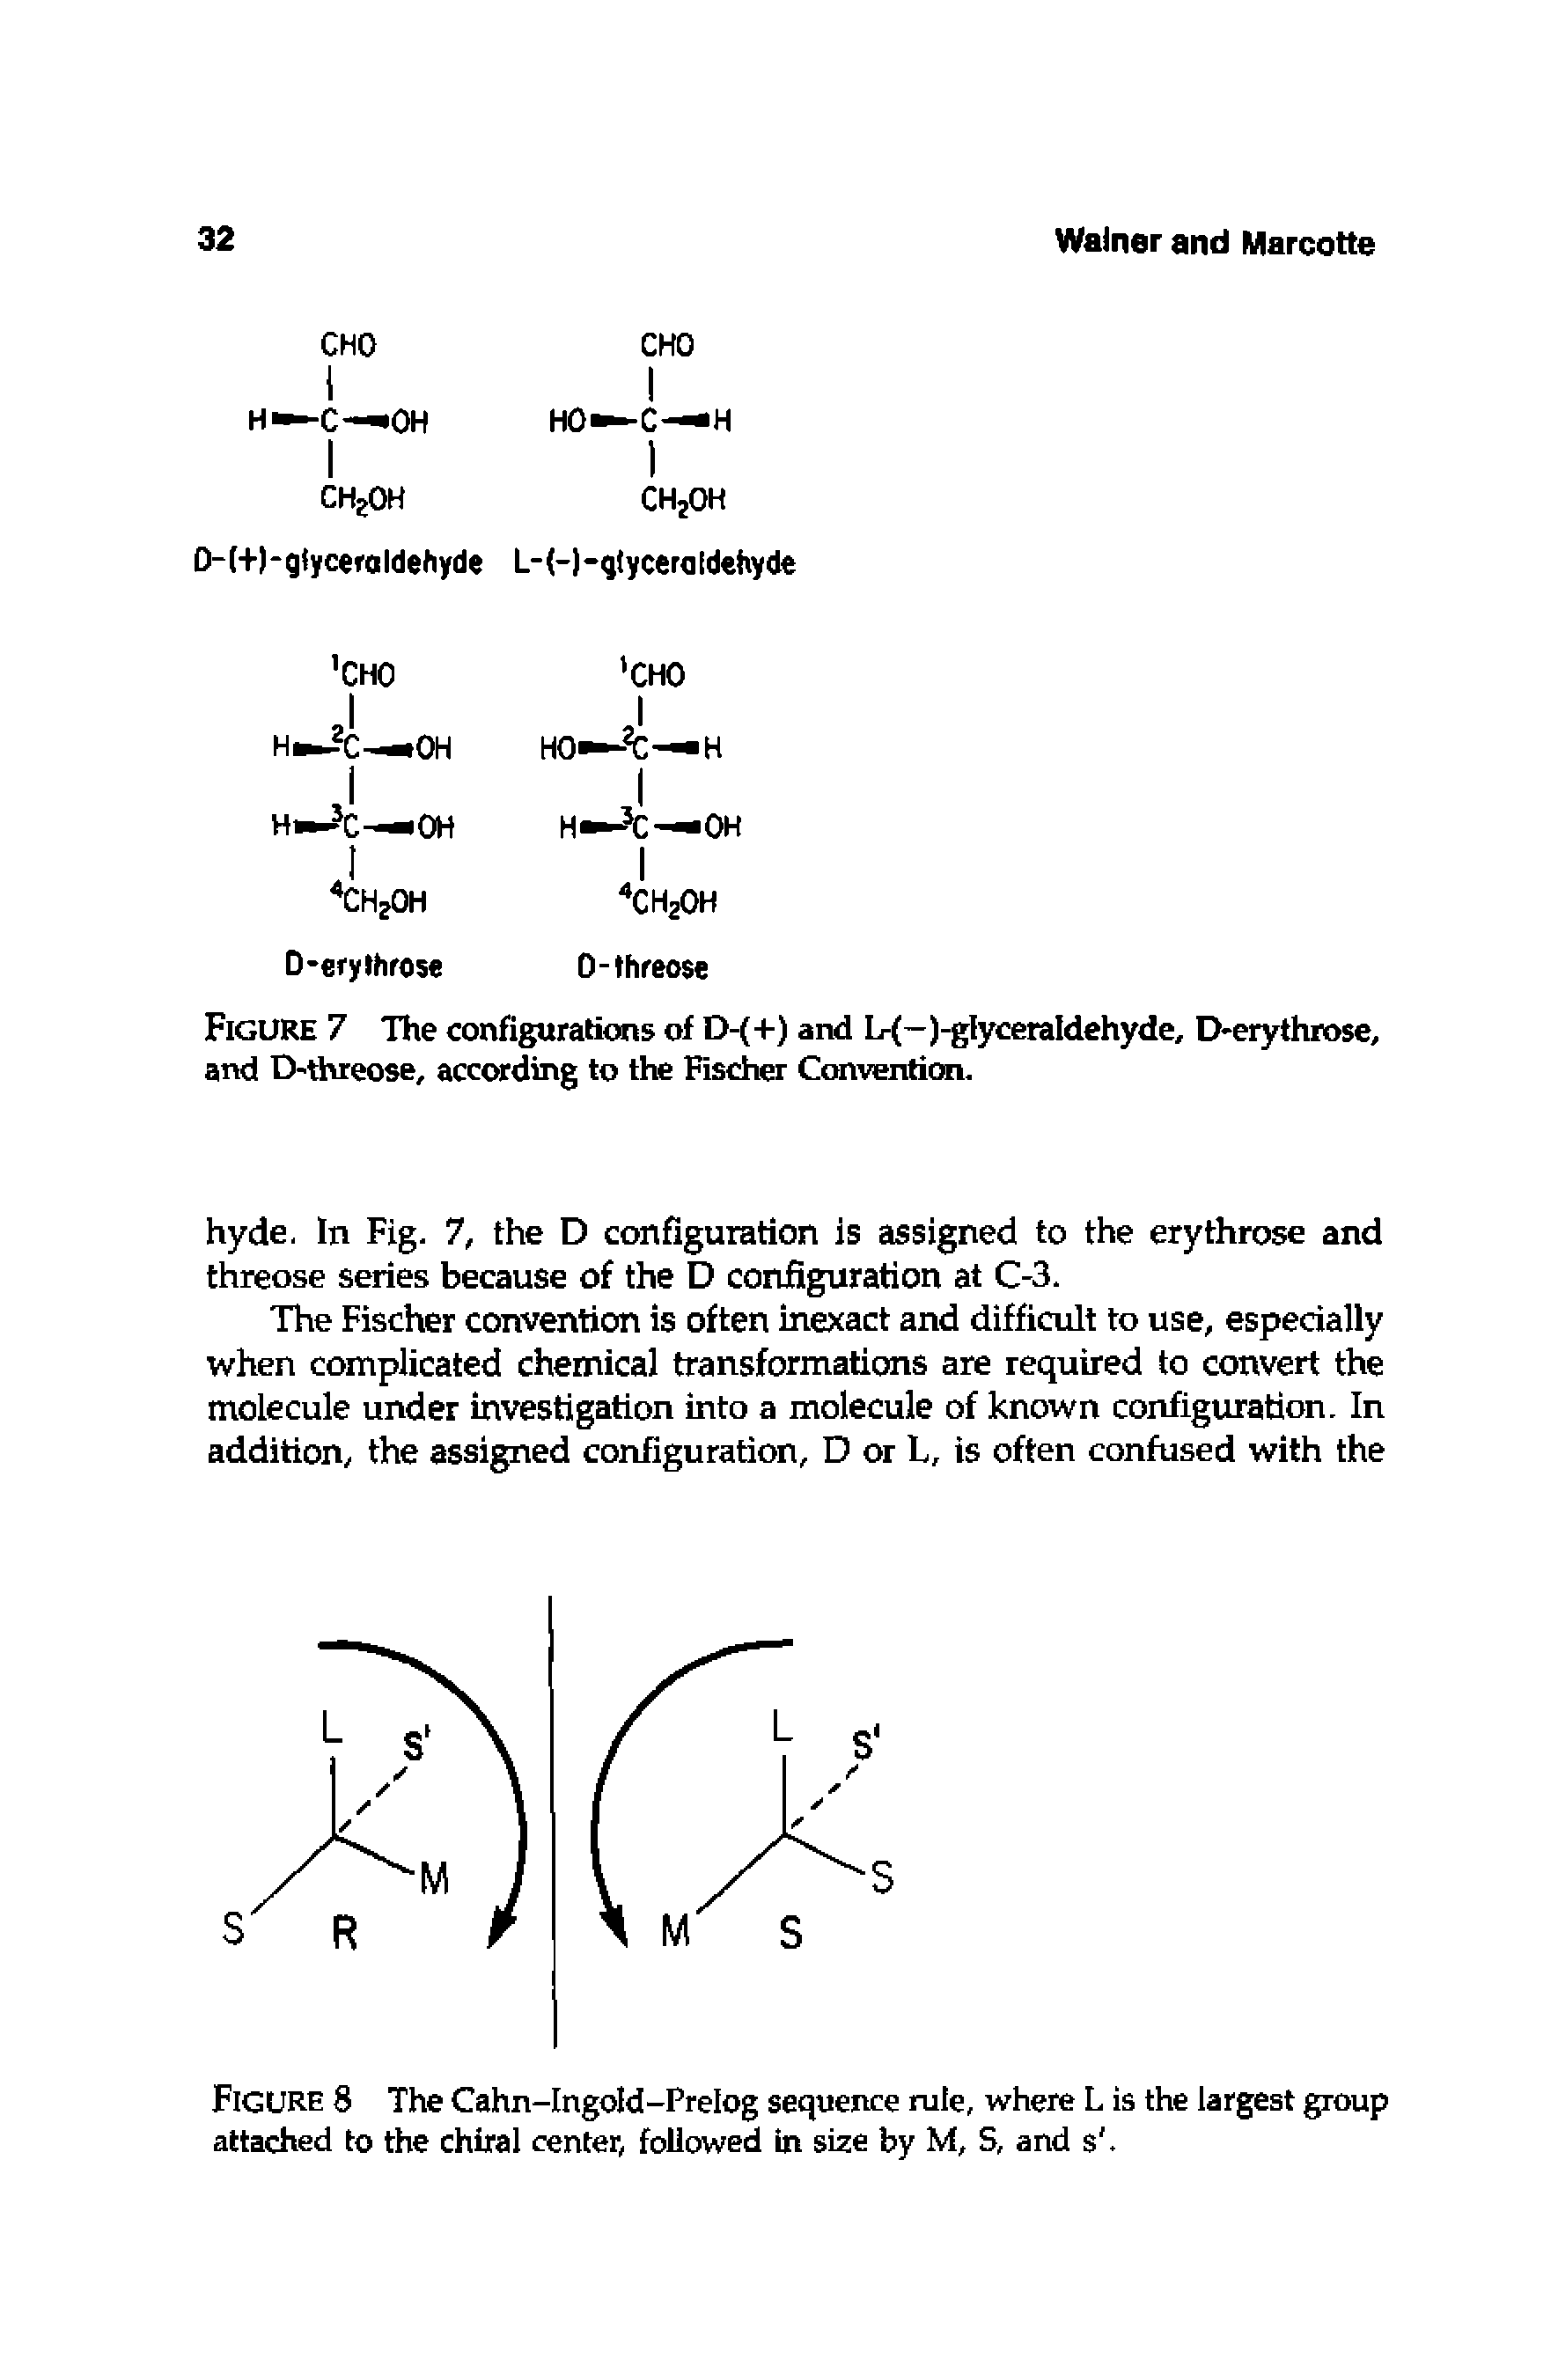 Figure 7 The configurations of D-(+) and L-(-)-gIyceraIdehyde, D-erythrose, and D threose, according to the Fischer Convention.